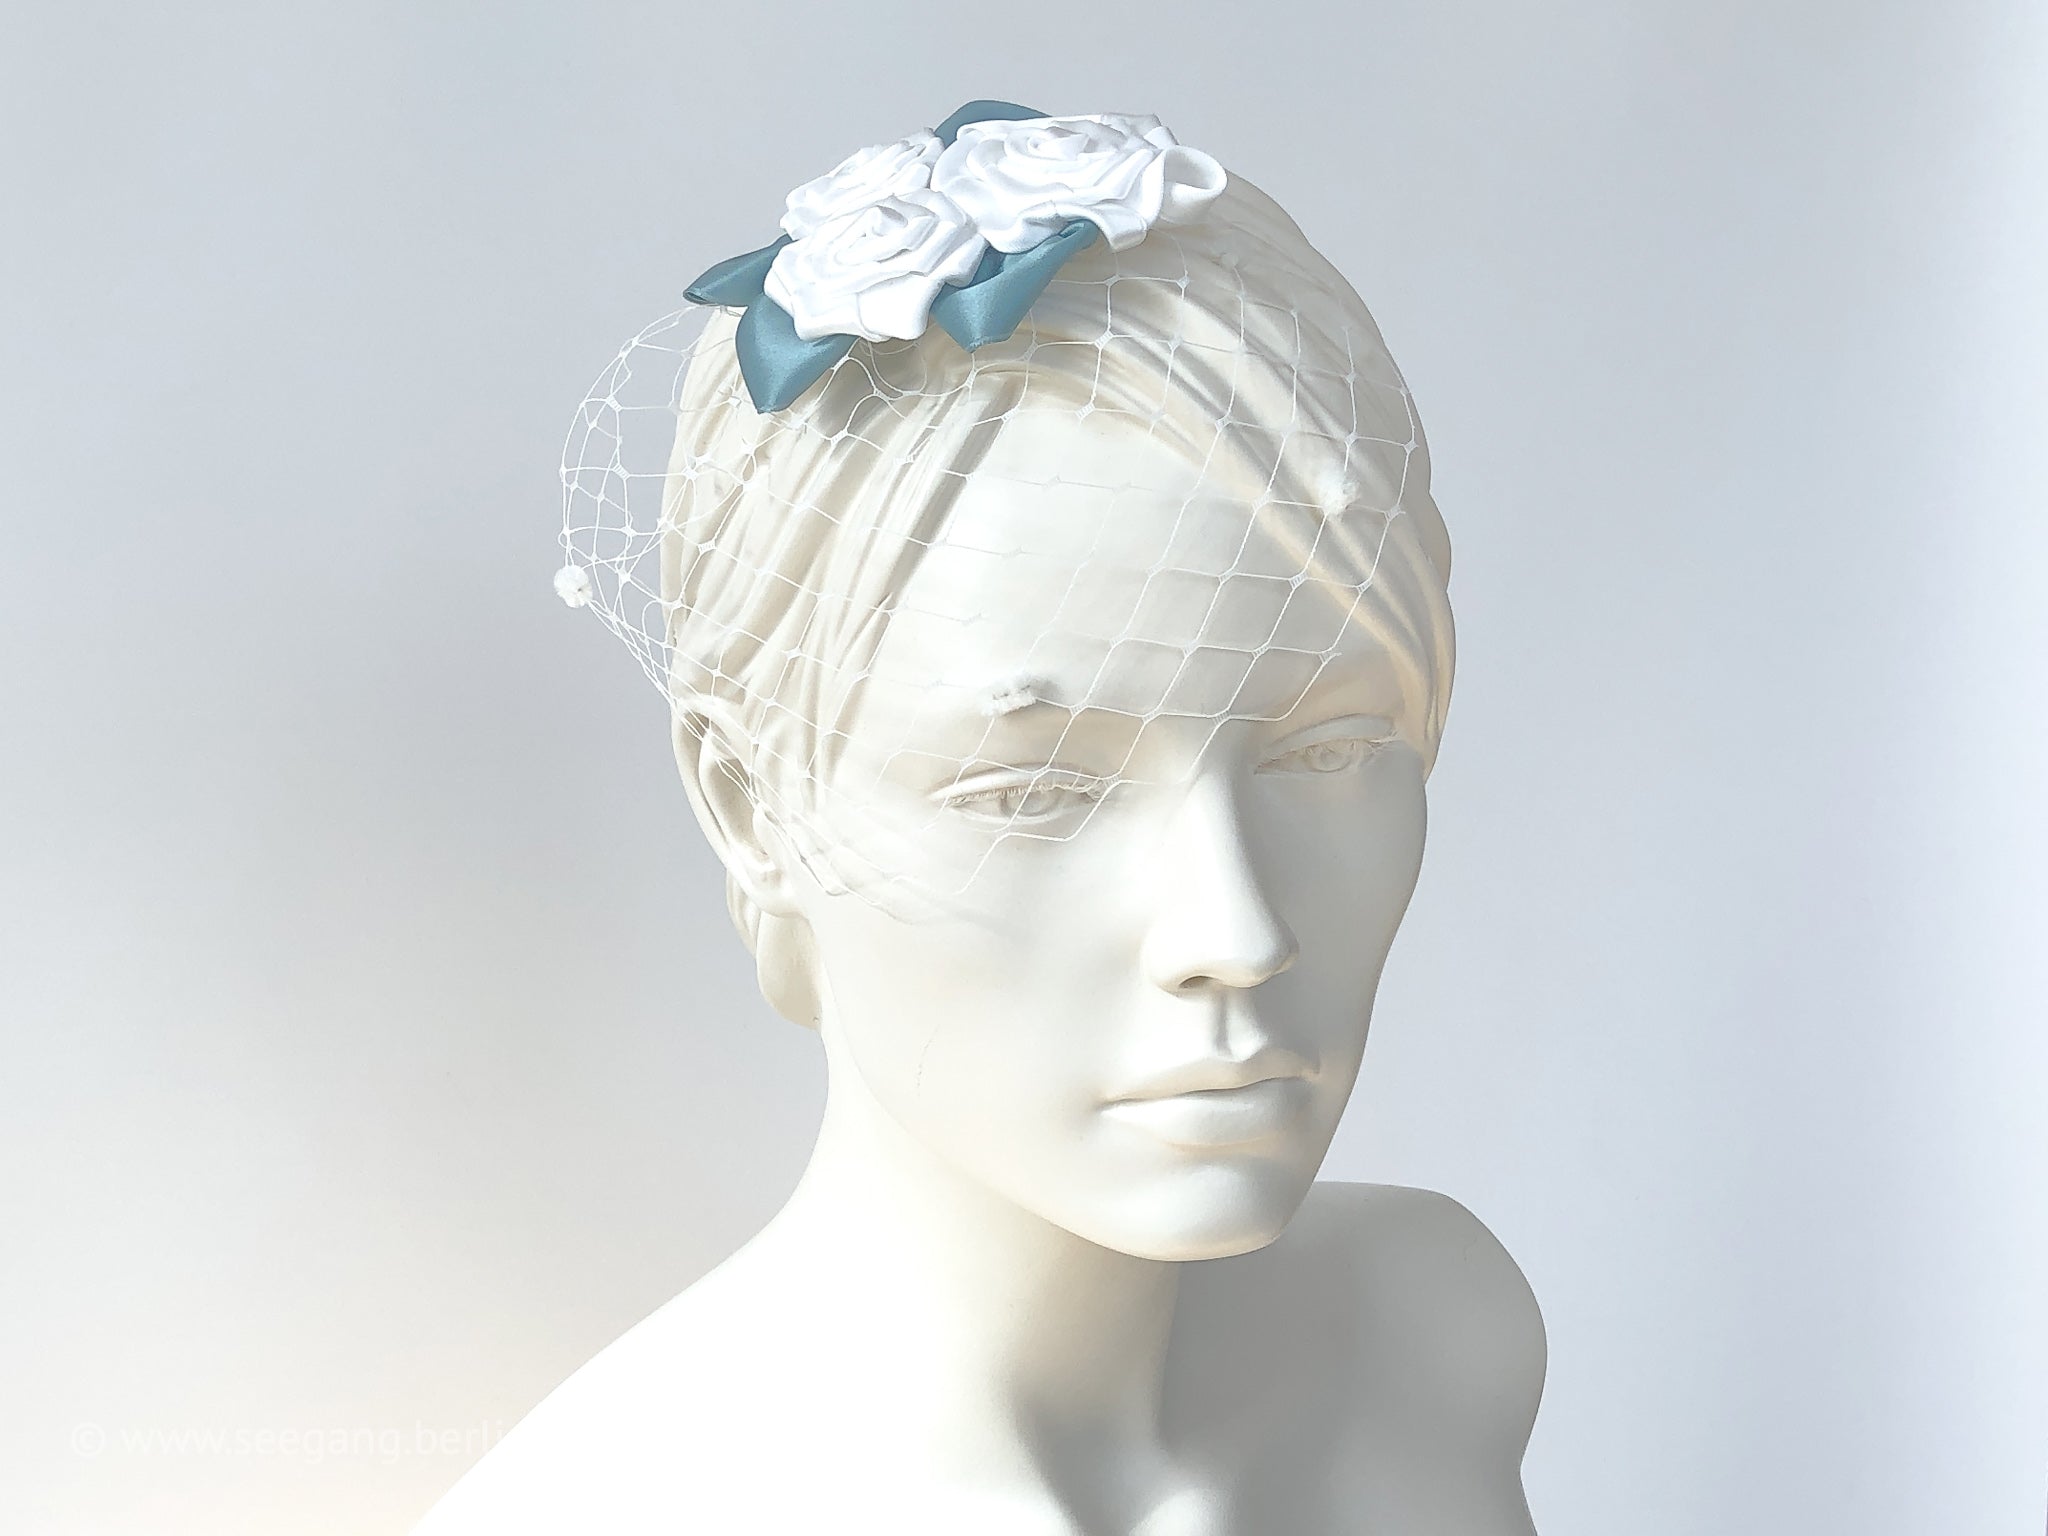 Fascinator, Hair flowers with roses in white, Off white, cream and green leaves.